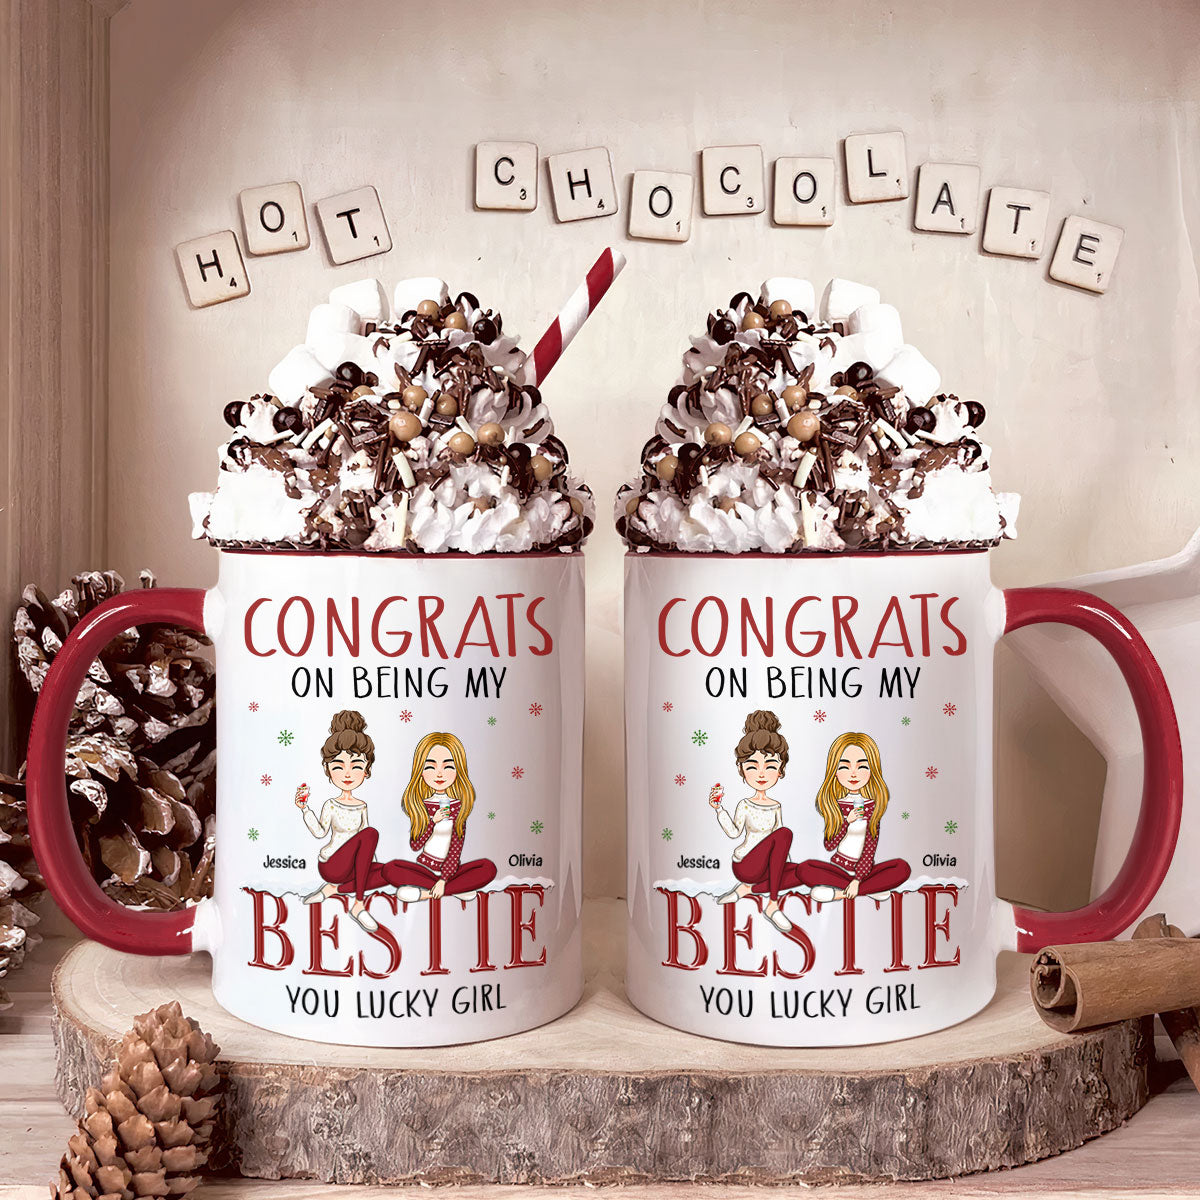 Congrats On Being My Besties - Personalized Accent Mug